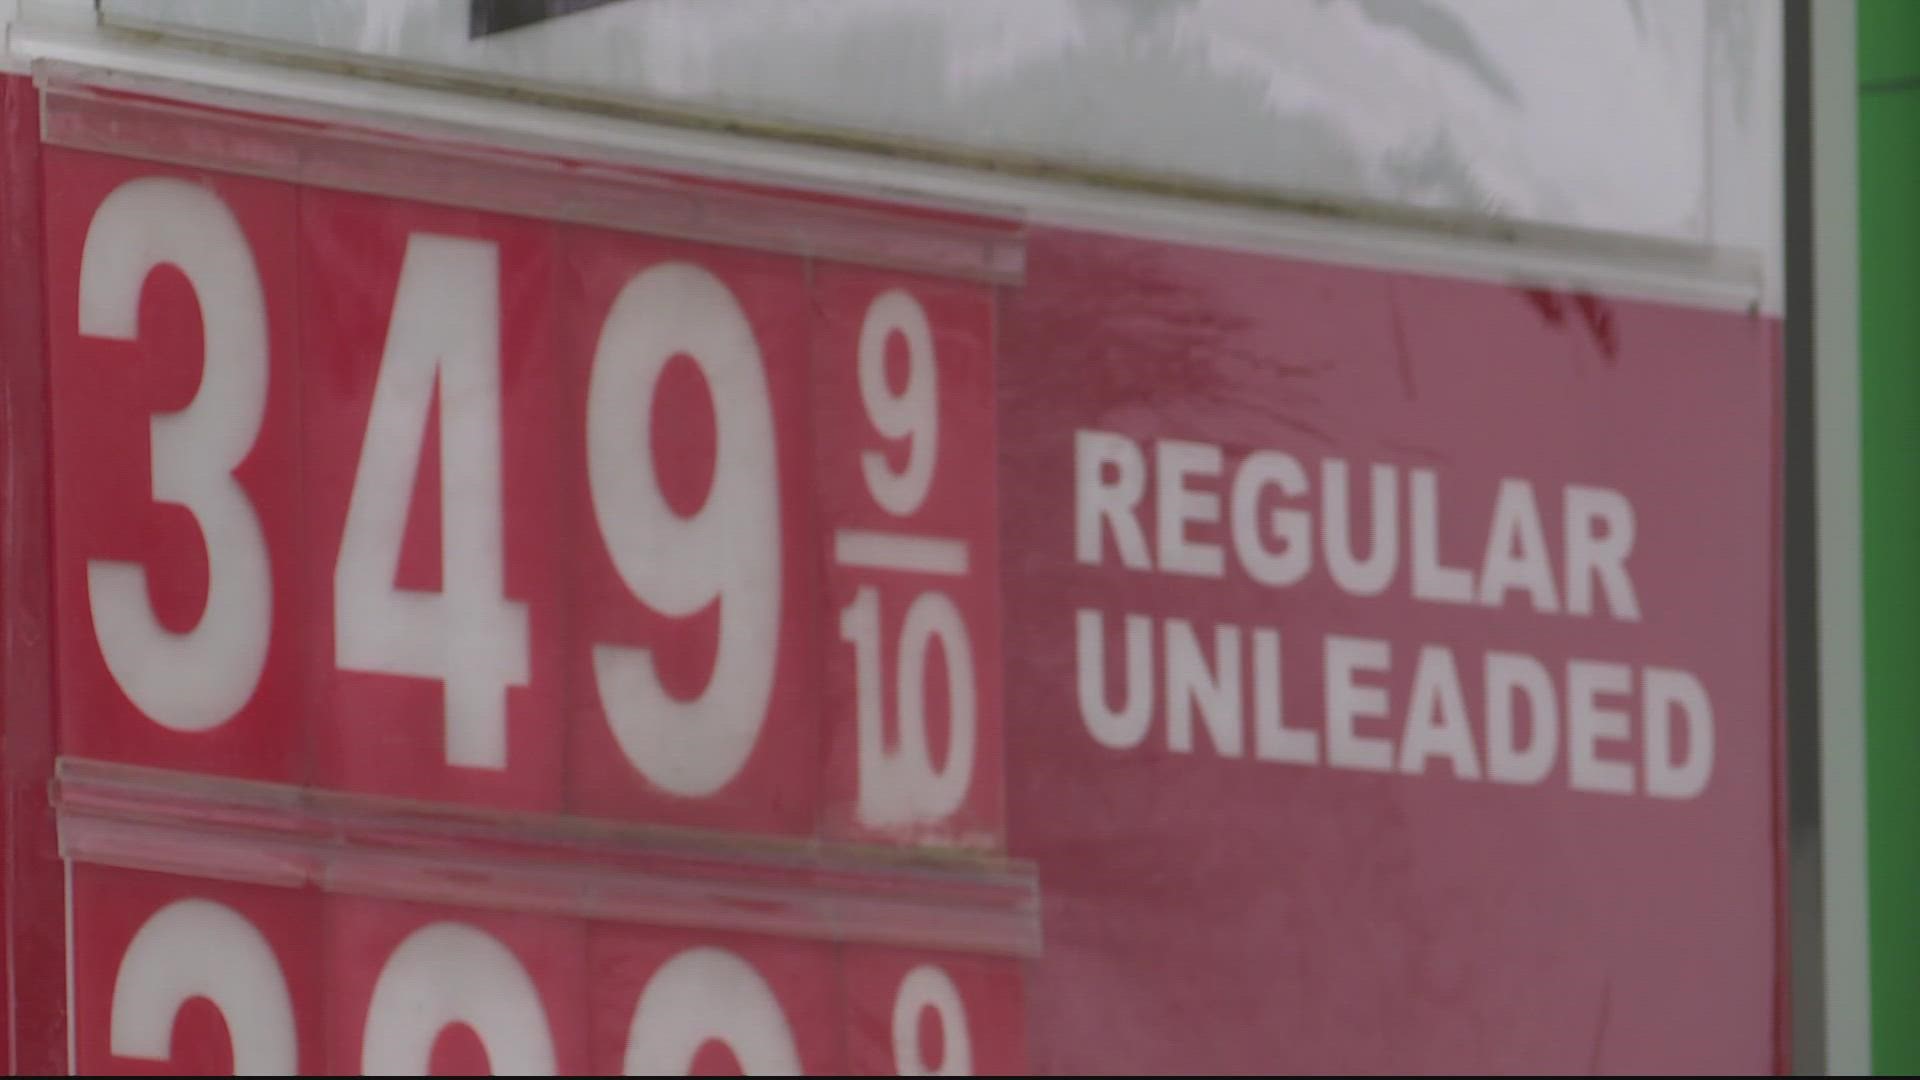 Drivers across the nation are getting some relief at the gas pump as prices continue to drop throughout the region